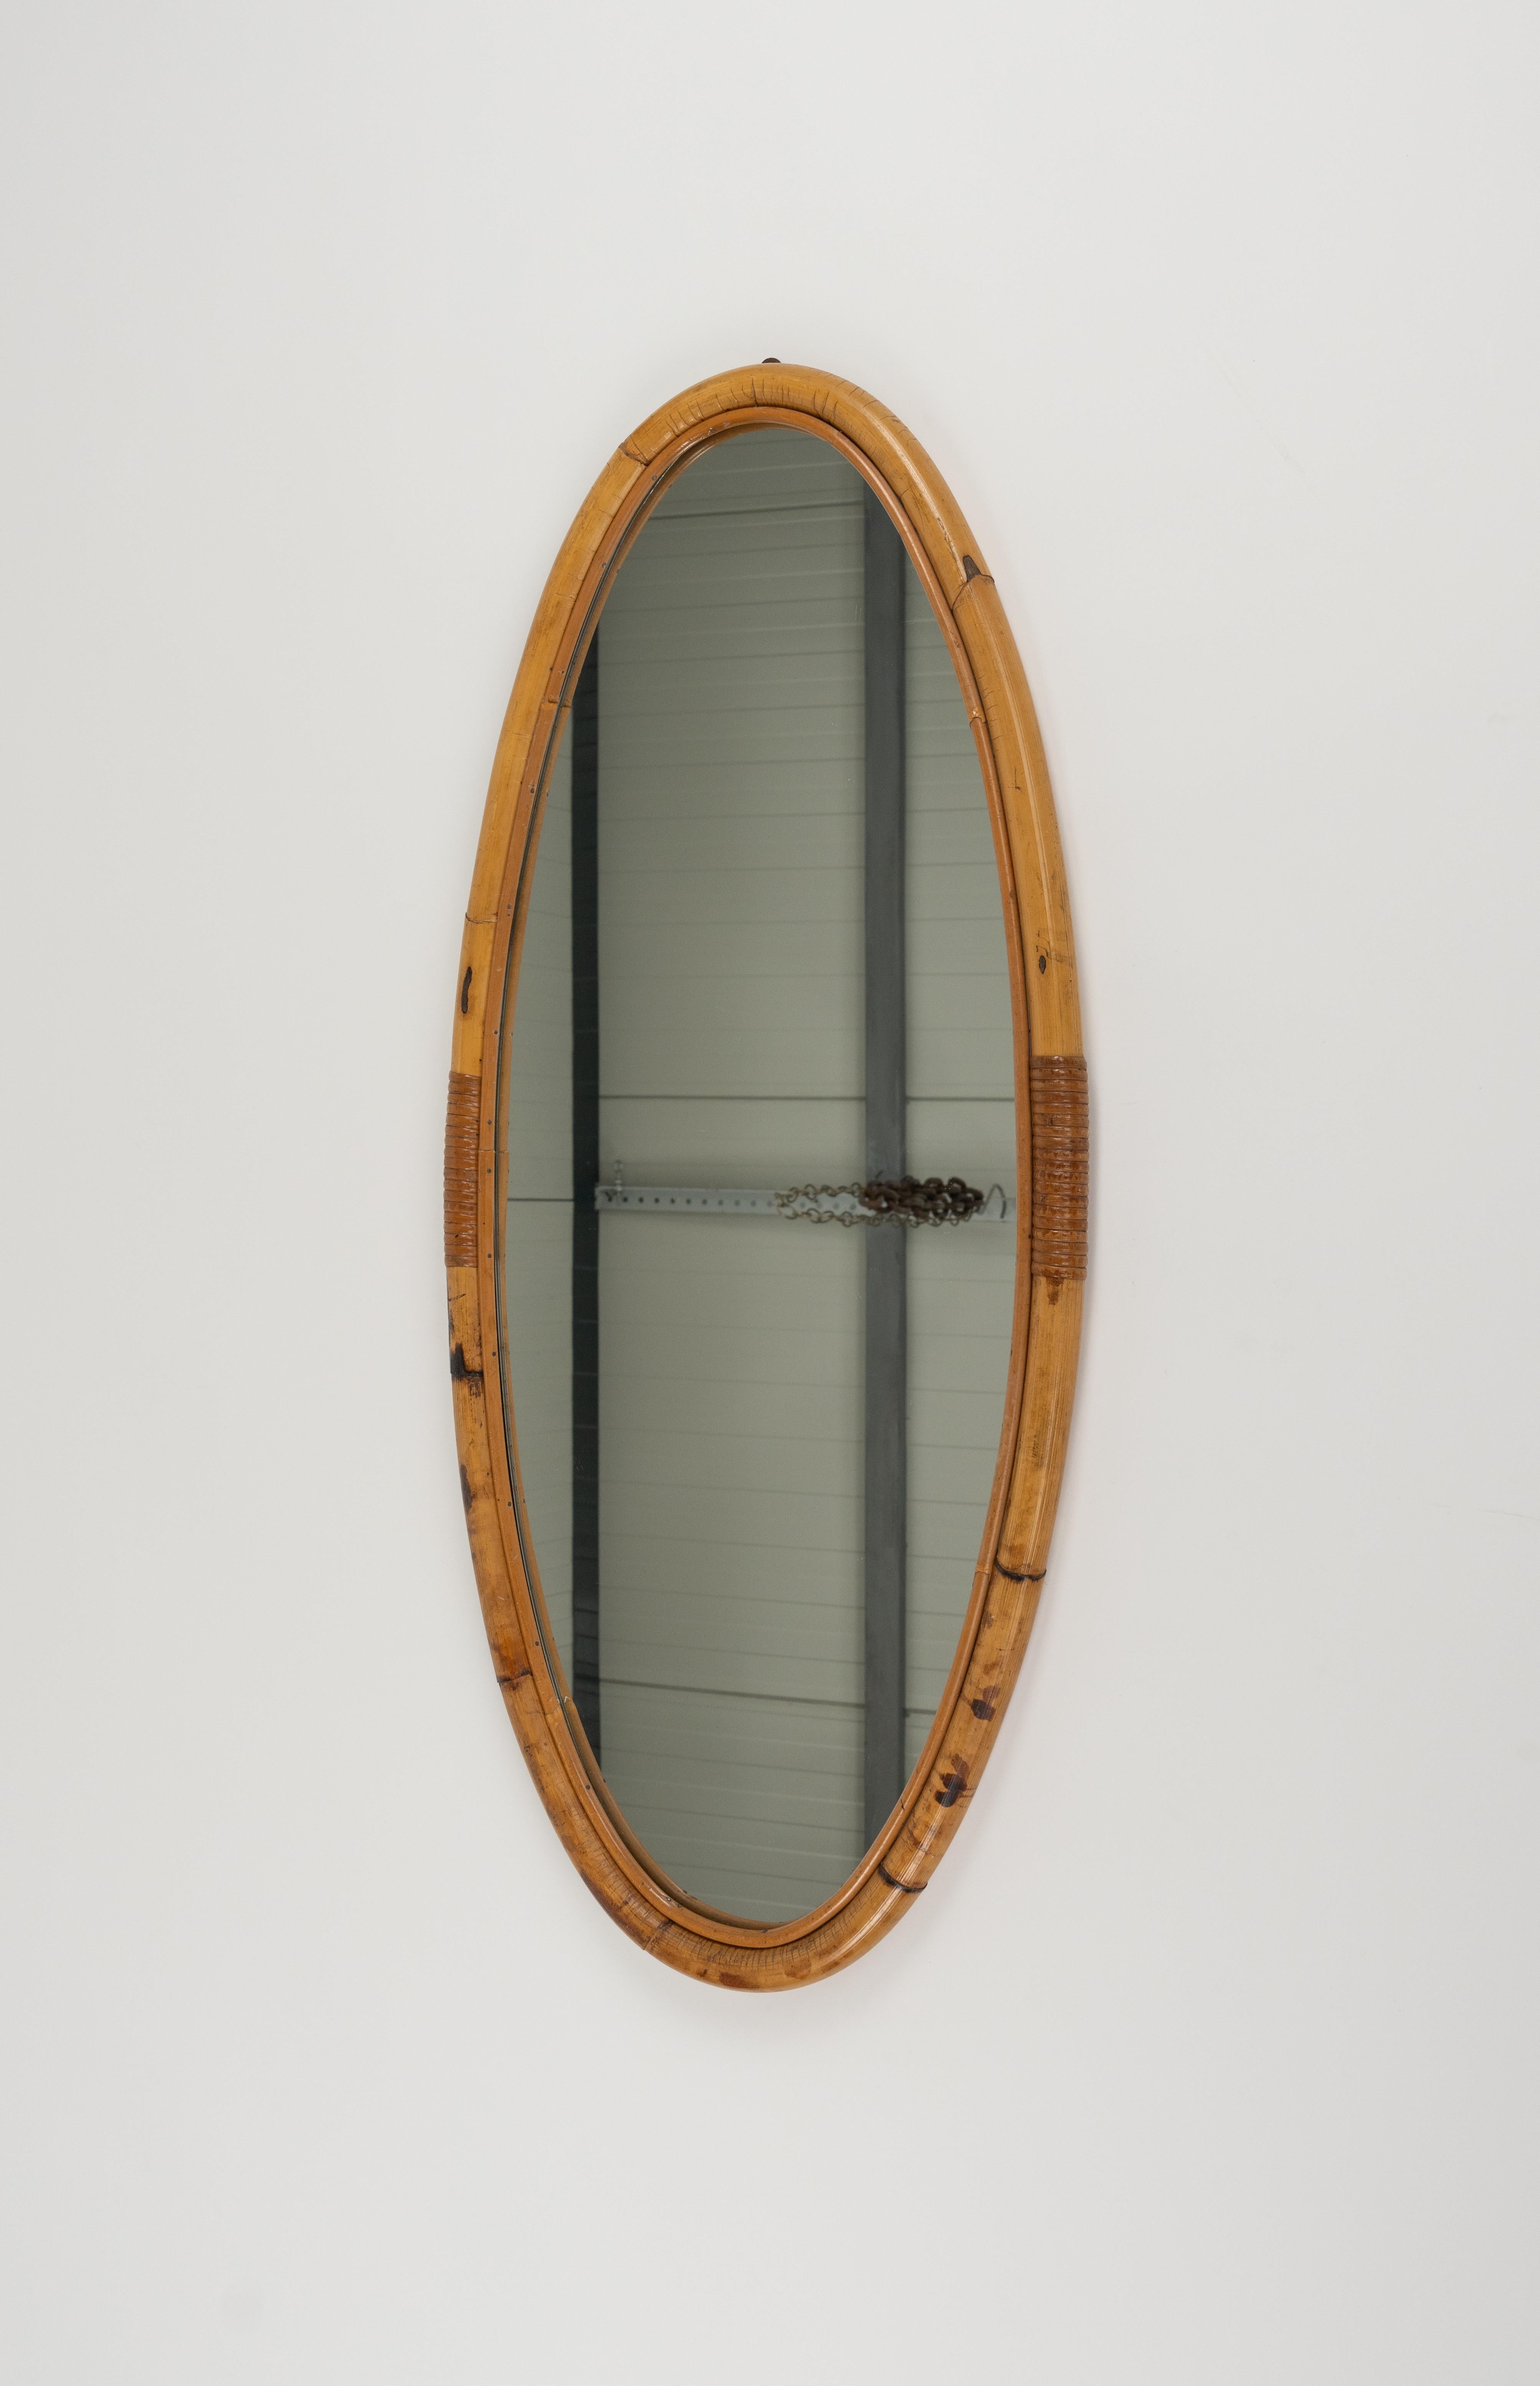 Midcentury Bamboo and Rattan Oval Wall Mirror, Italy 1970s For Sale 3